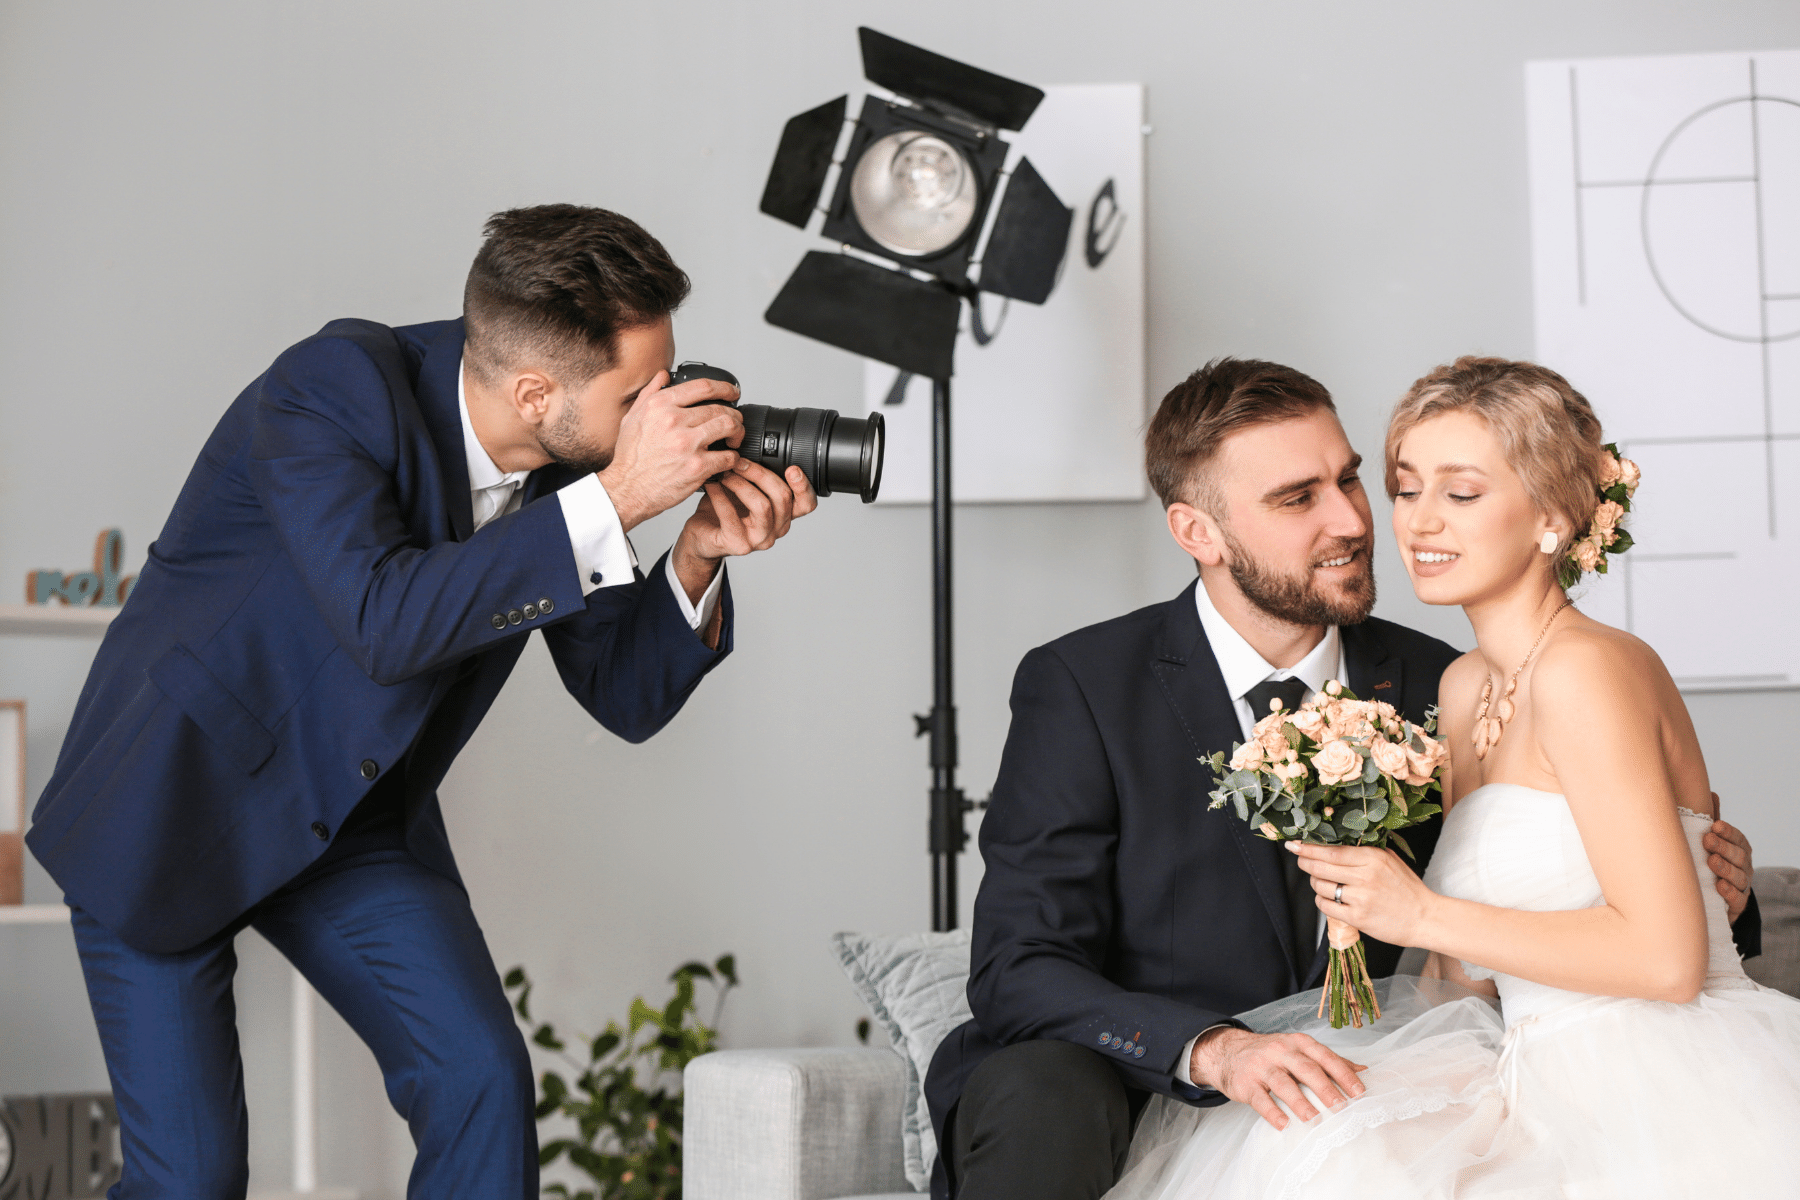 Wedding Photography Tips for Beginners - B&C Camera